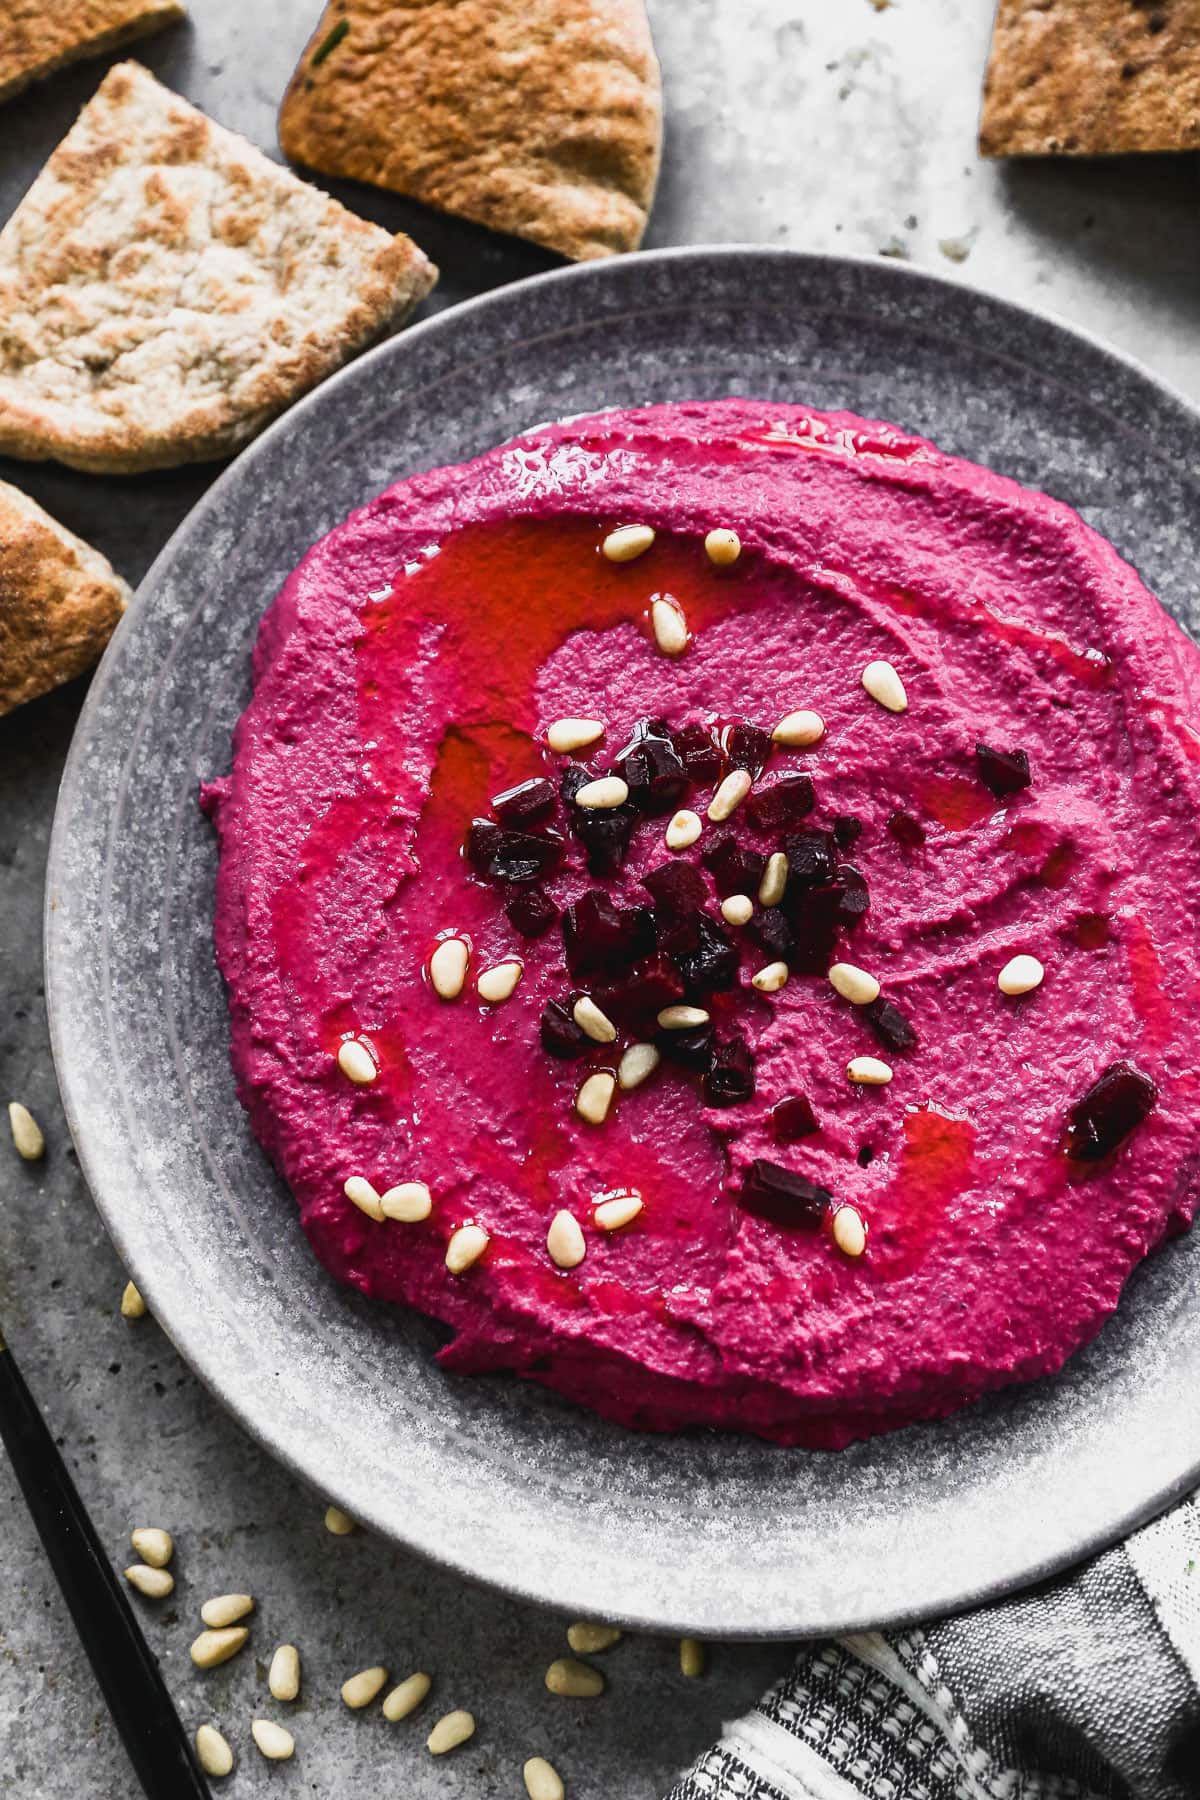 Beet Hummus: A Delight for the Eyes and Taste Buds